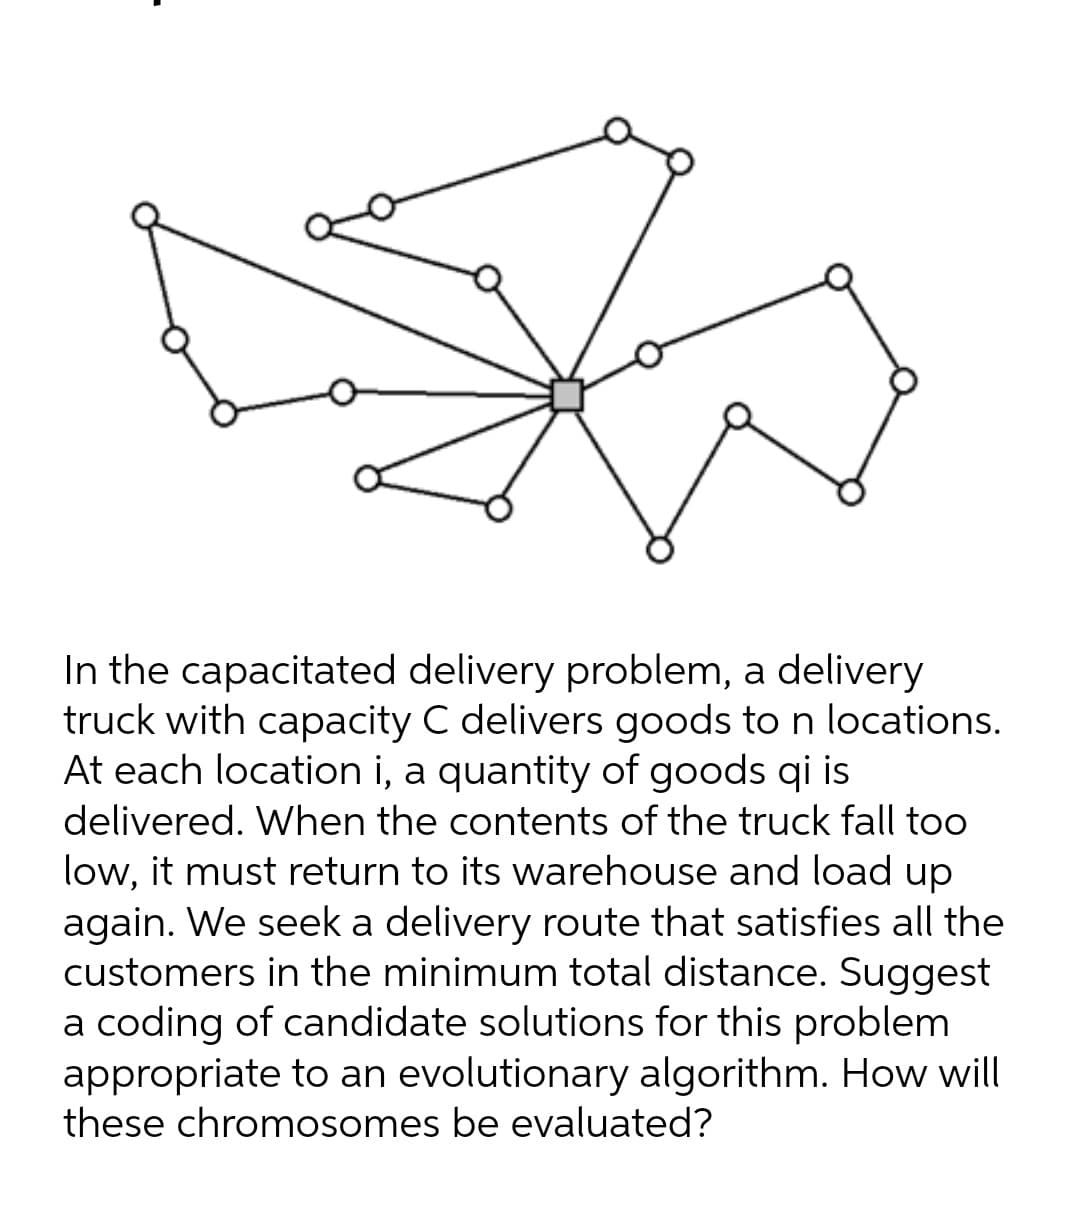 In the capacitated delivery problem, a delivery
truck with capacity C delivers goods to n locations.
At each location i, a quantity of goods qi is
delivered. When the contents of the truck fall too
low, it must return to its warehouse and load up
again. We seek a delivery route that satisfies all the
customers in the minimum total distance. Suggest
a coding of candidate solutions for this problem
appropriate to an evolutionary algorithm. How will
these chromosomes be evaluated?
